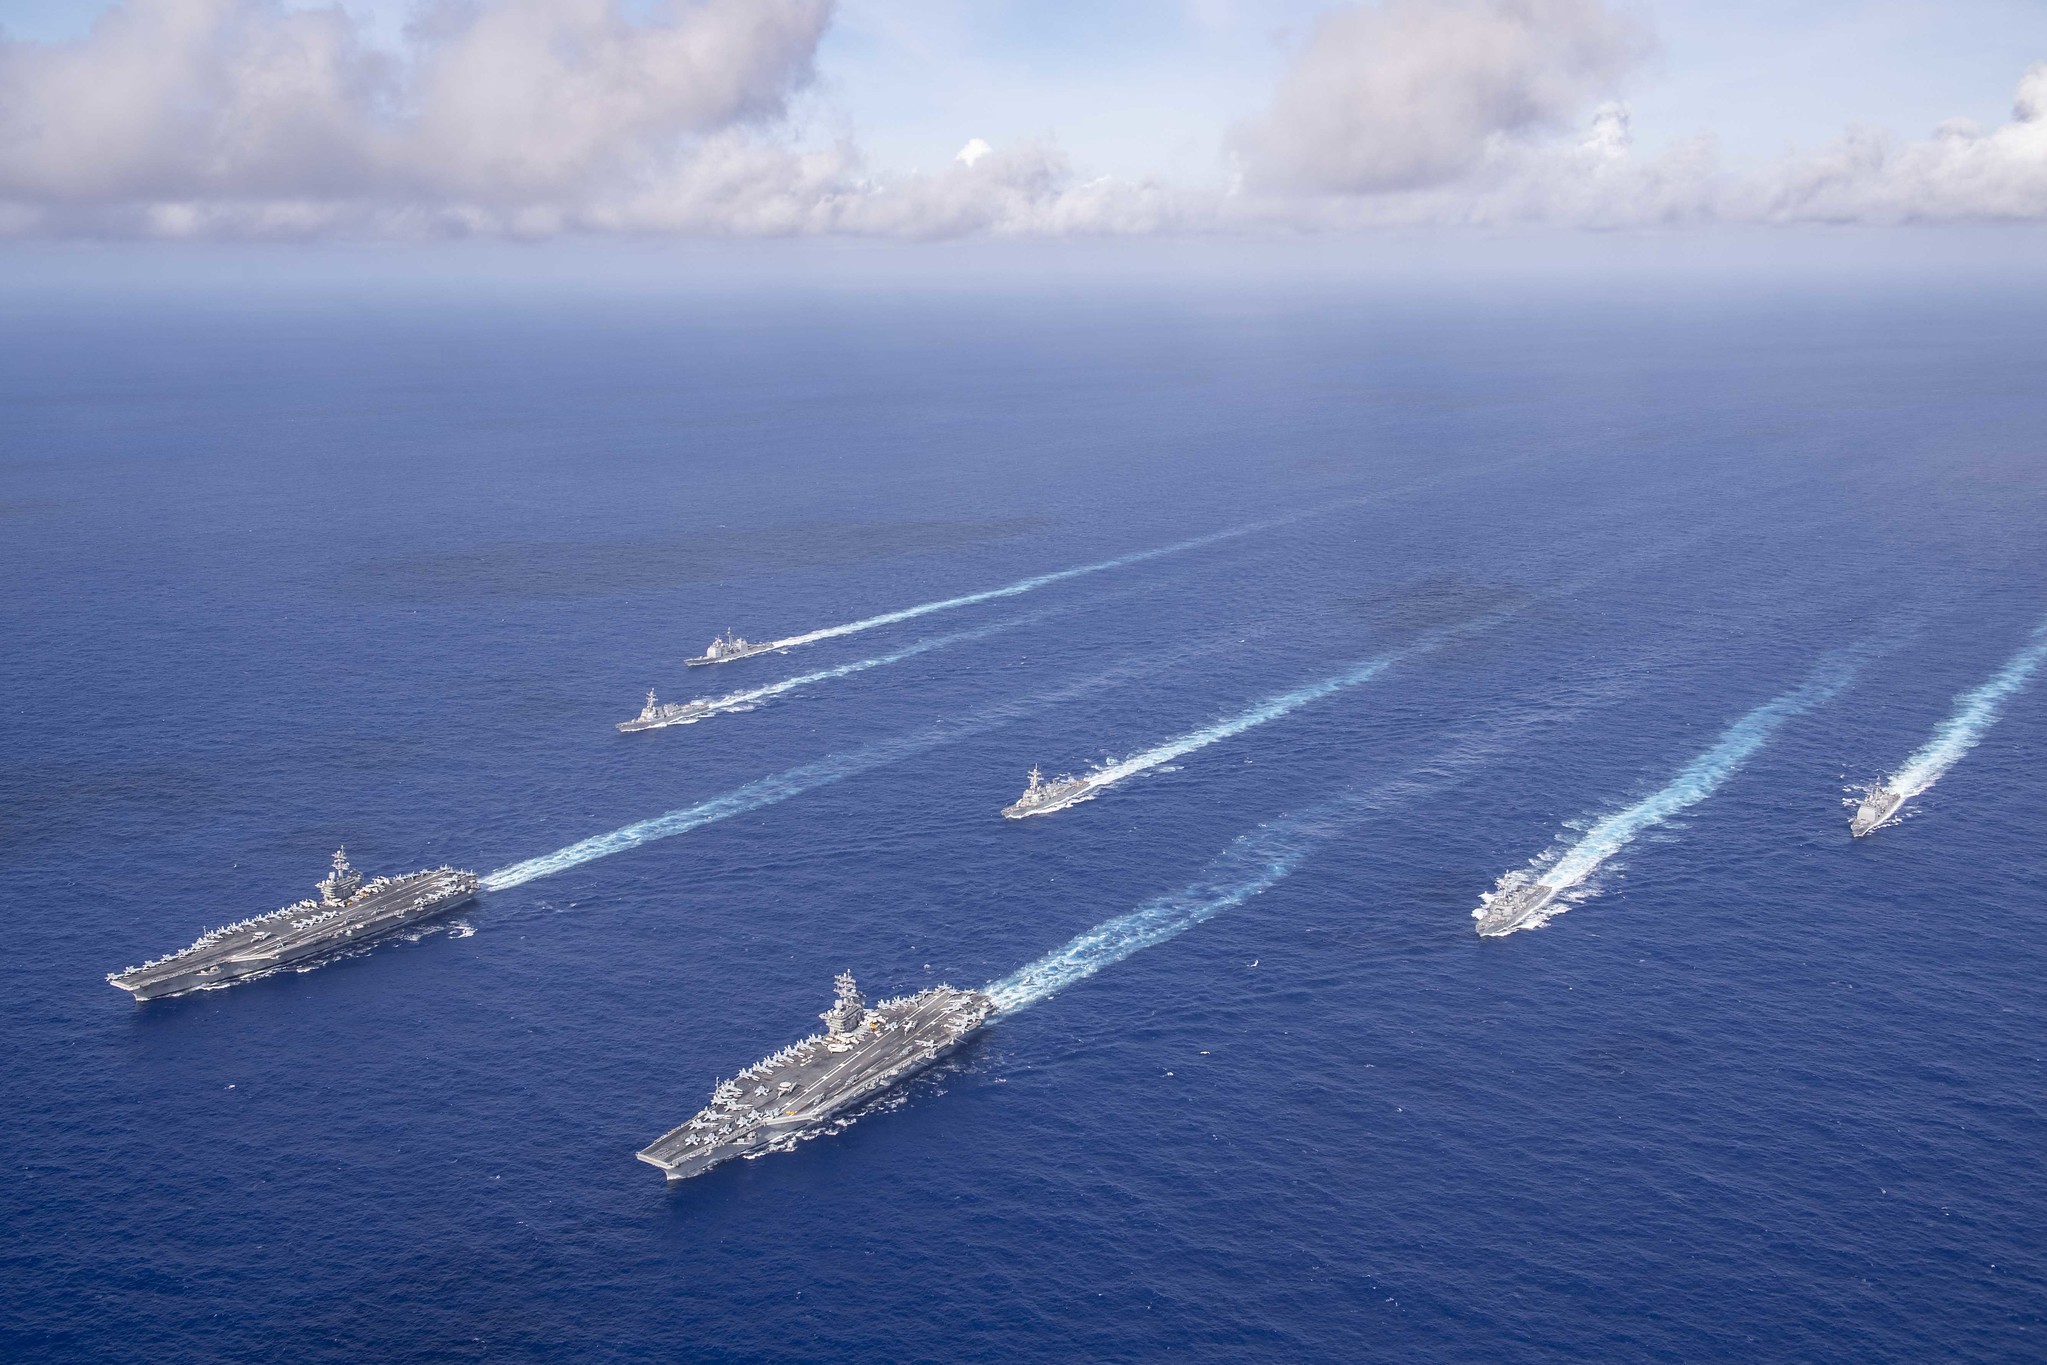 How Big of a Fleet? A Look at the U.S. Navy's Size and Readiness